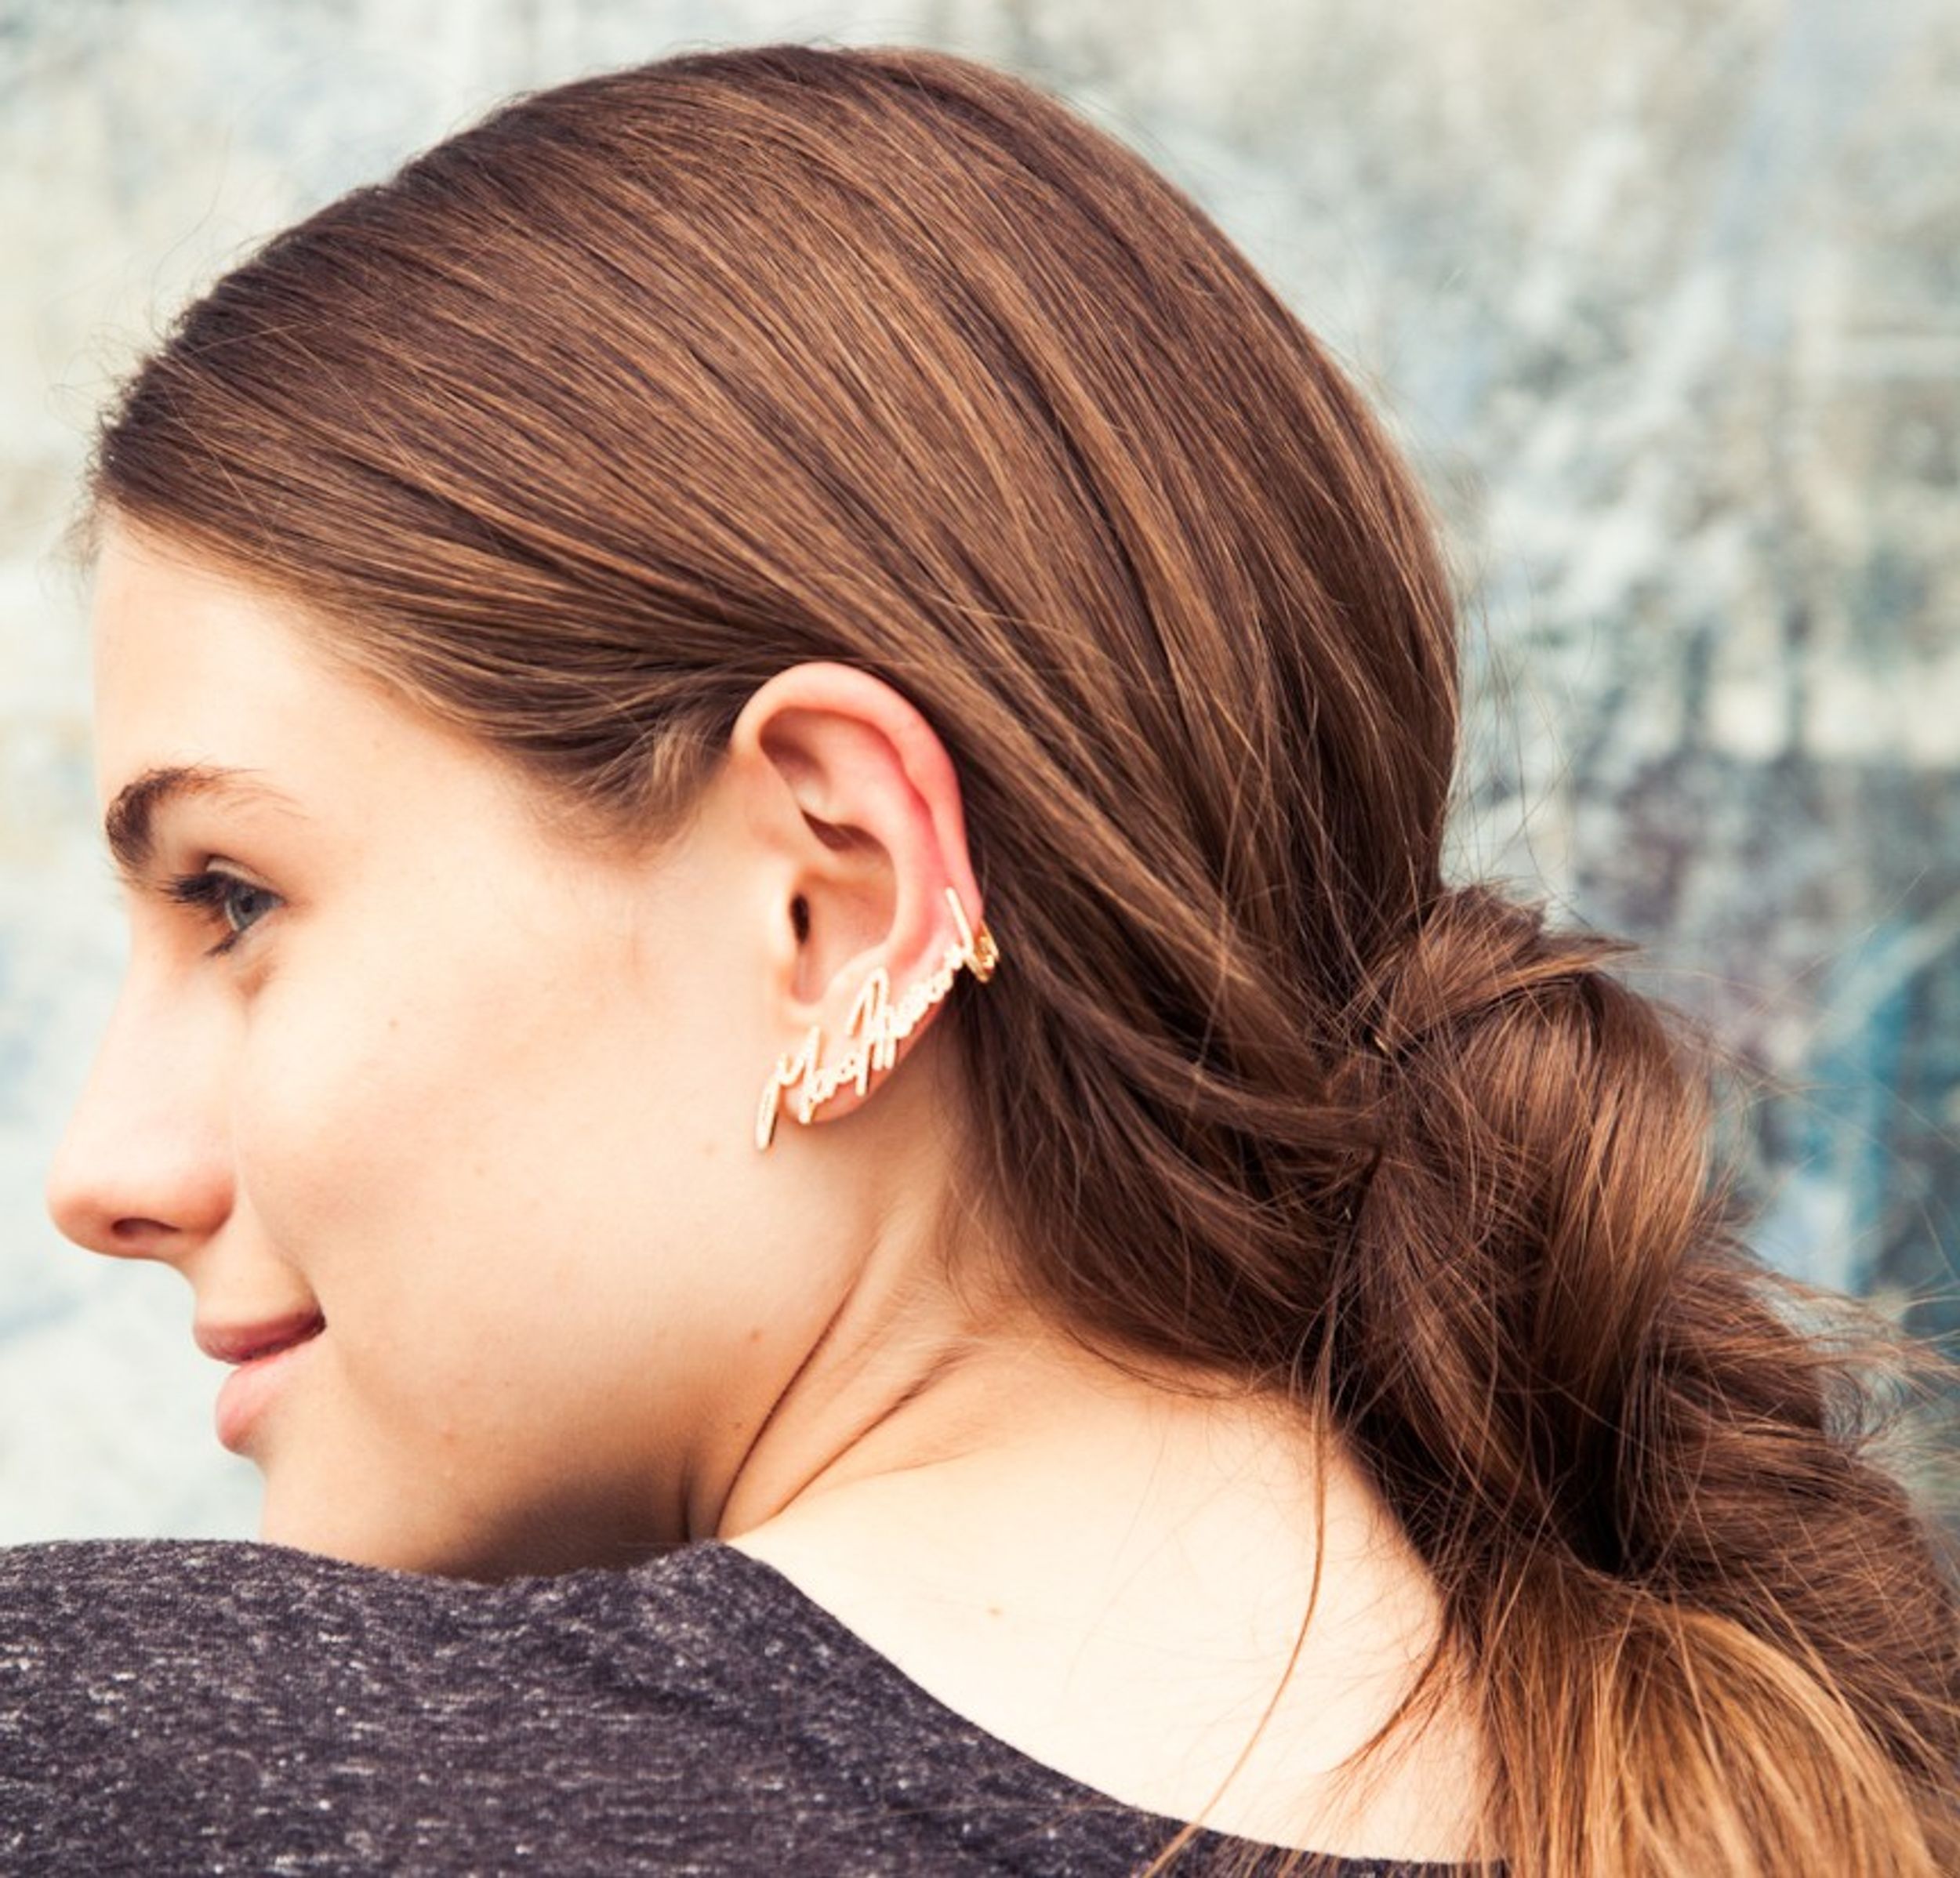 3 Hairstyles to Show Off This Season's Statement Earrings